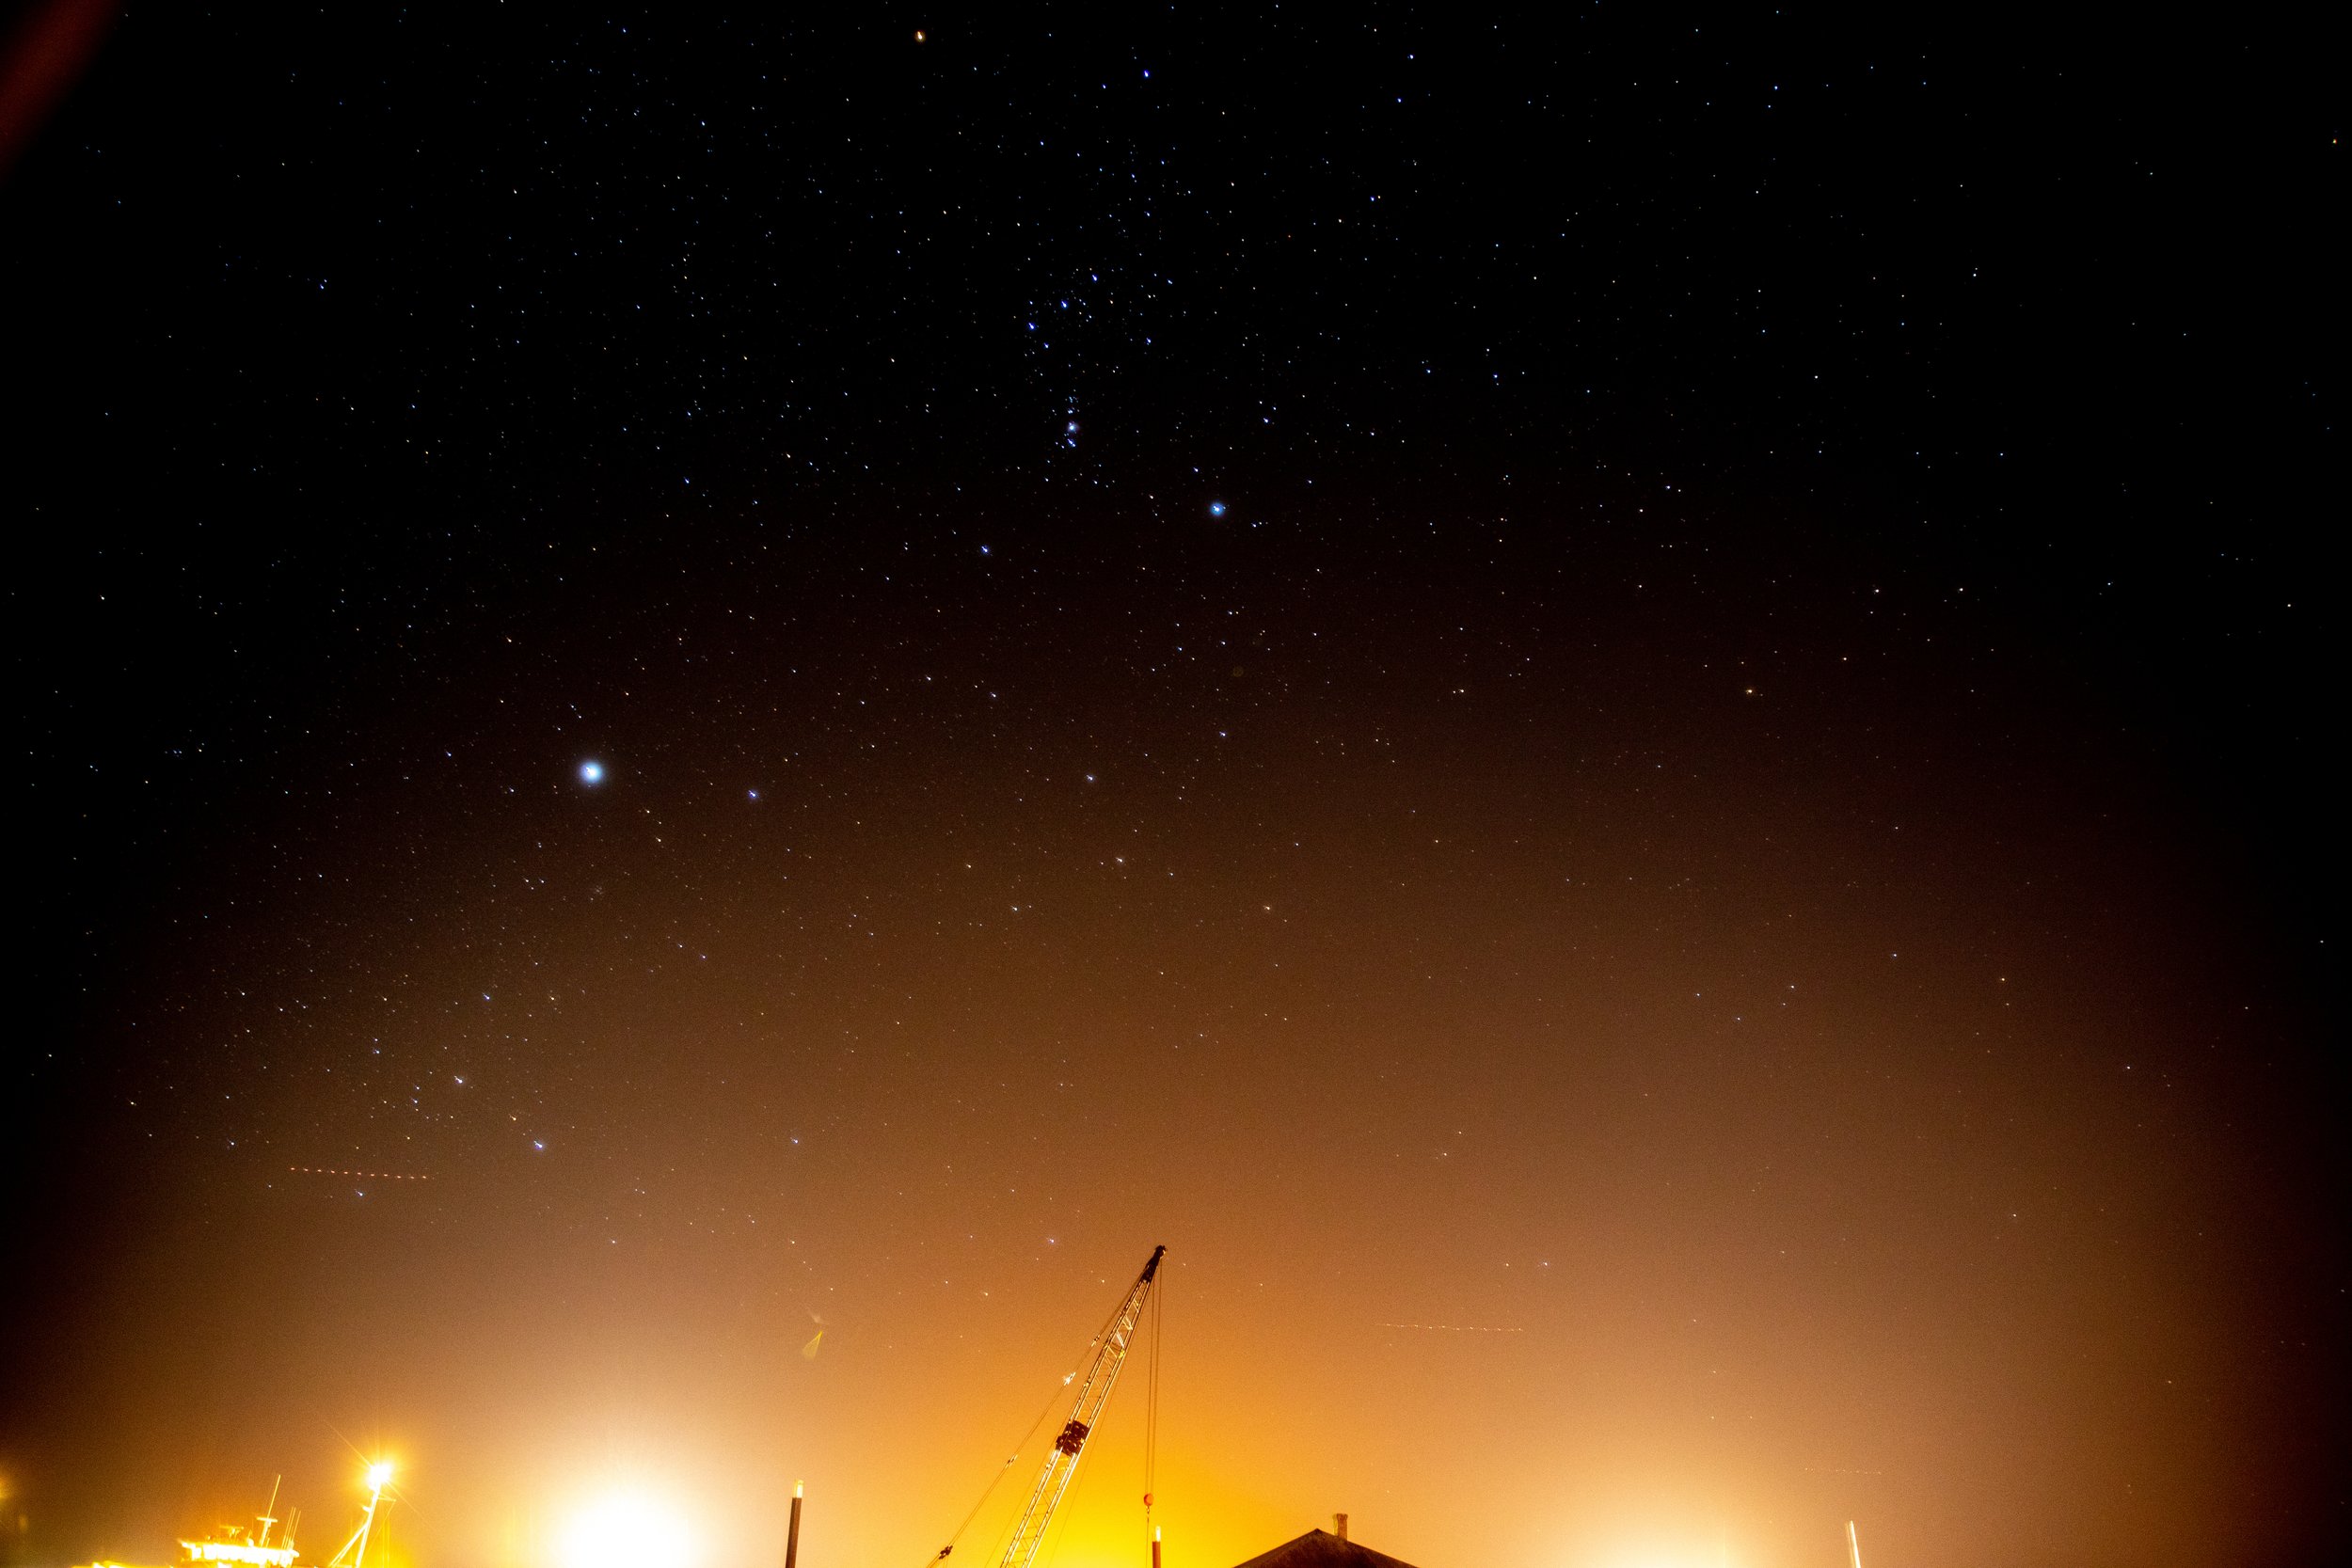 Nantucket Town at night, under constellations Canis Major (with bright star Sirius) and Orion (top center)